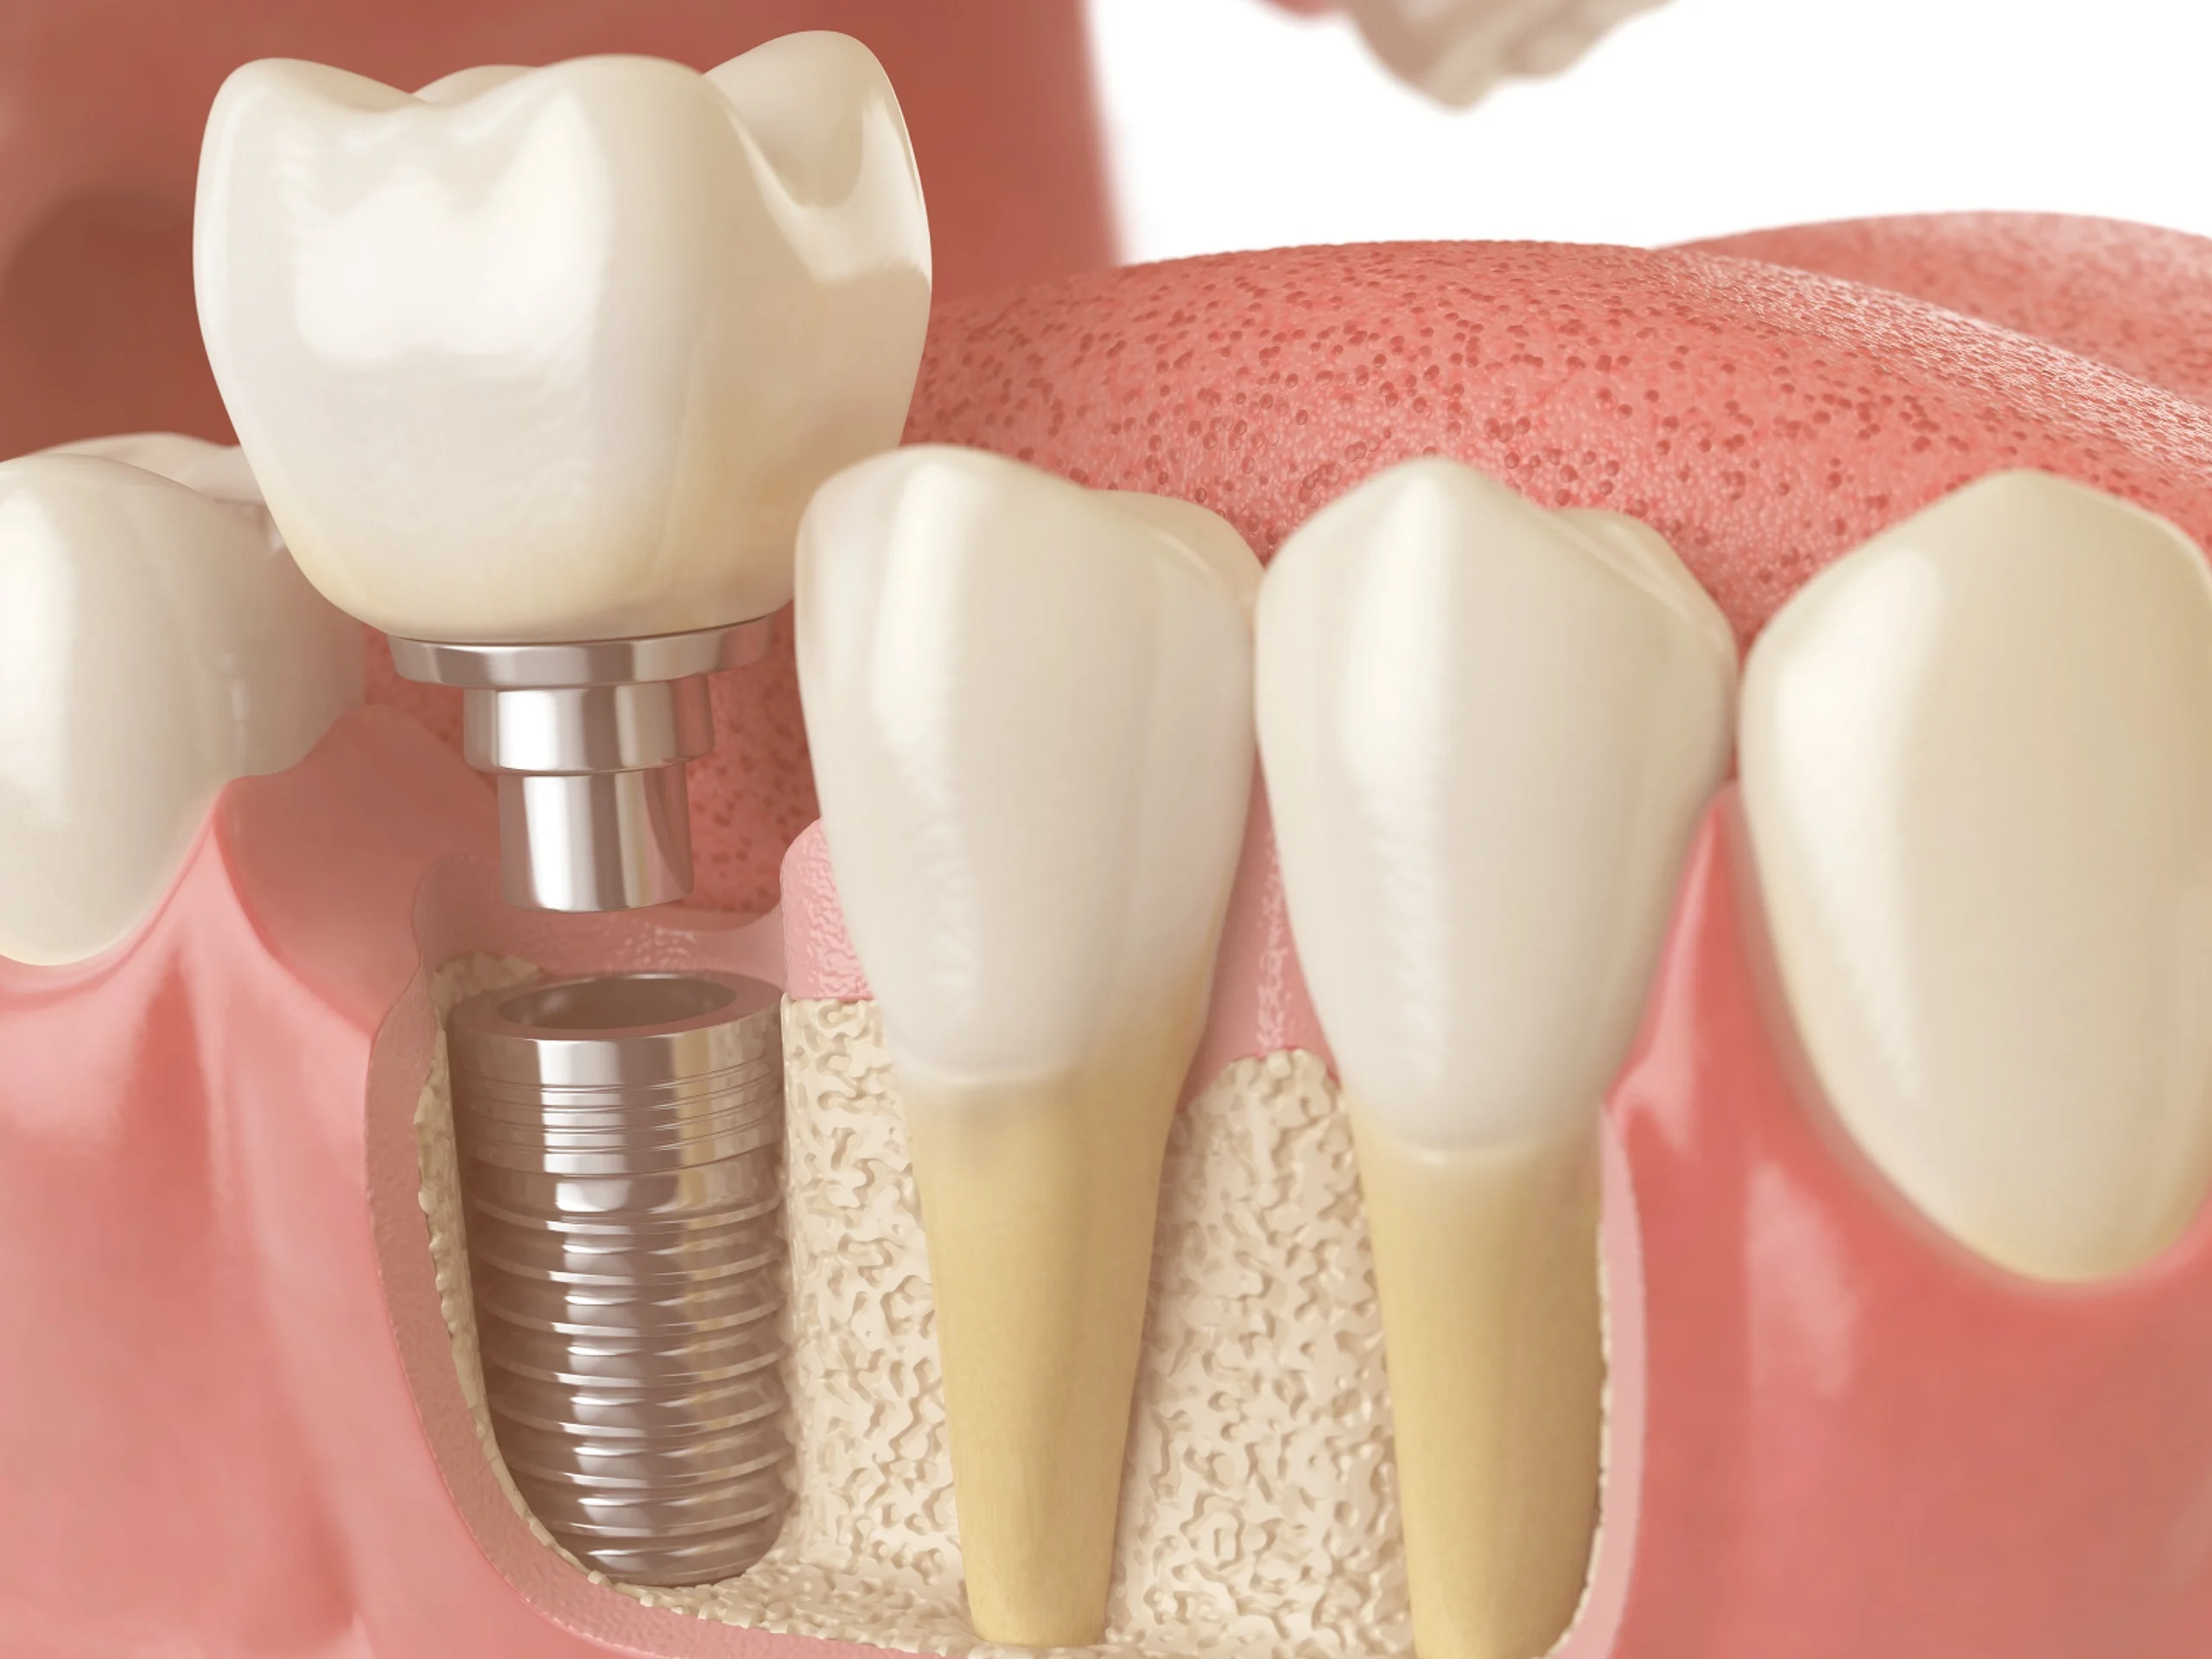 what is the process by which the living jawbone naturally grows around the dental implant?